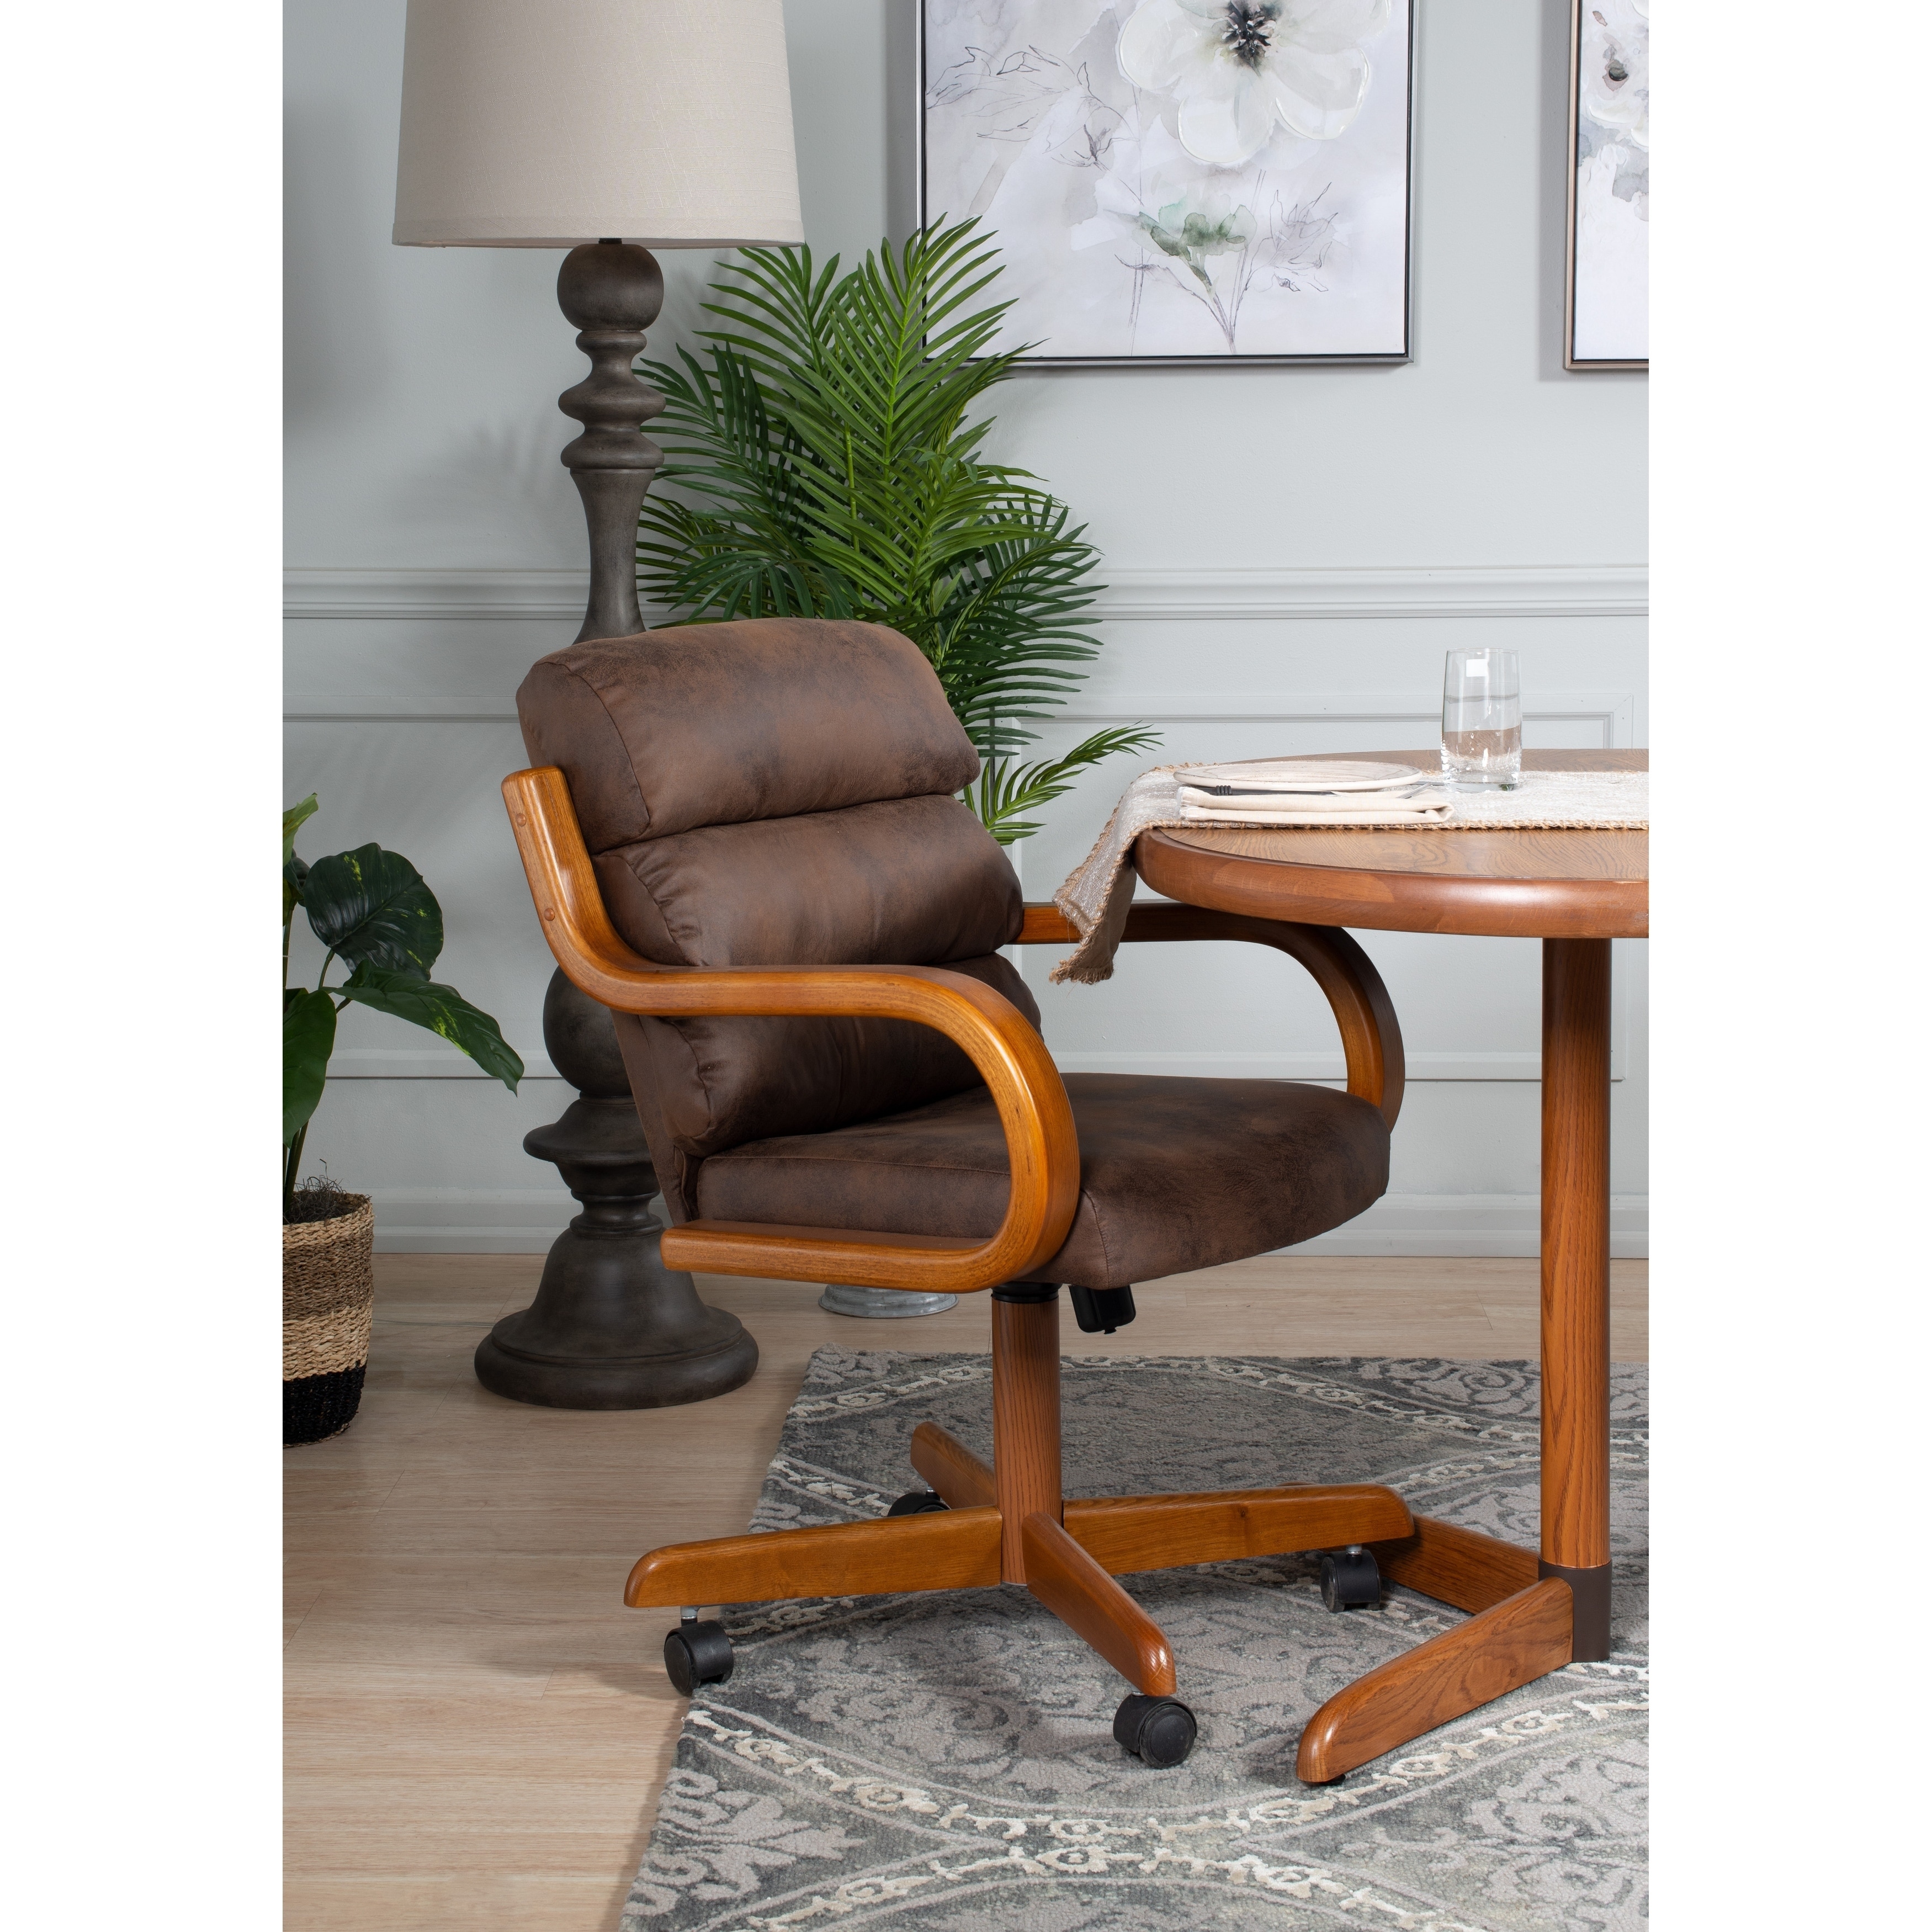 Solid Wood Rolling Caster Chair With Tilt And Cushion Seat